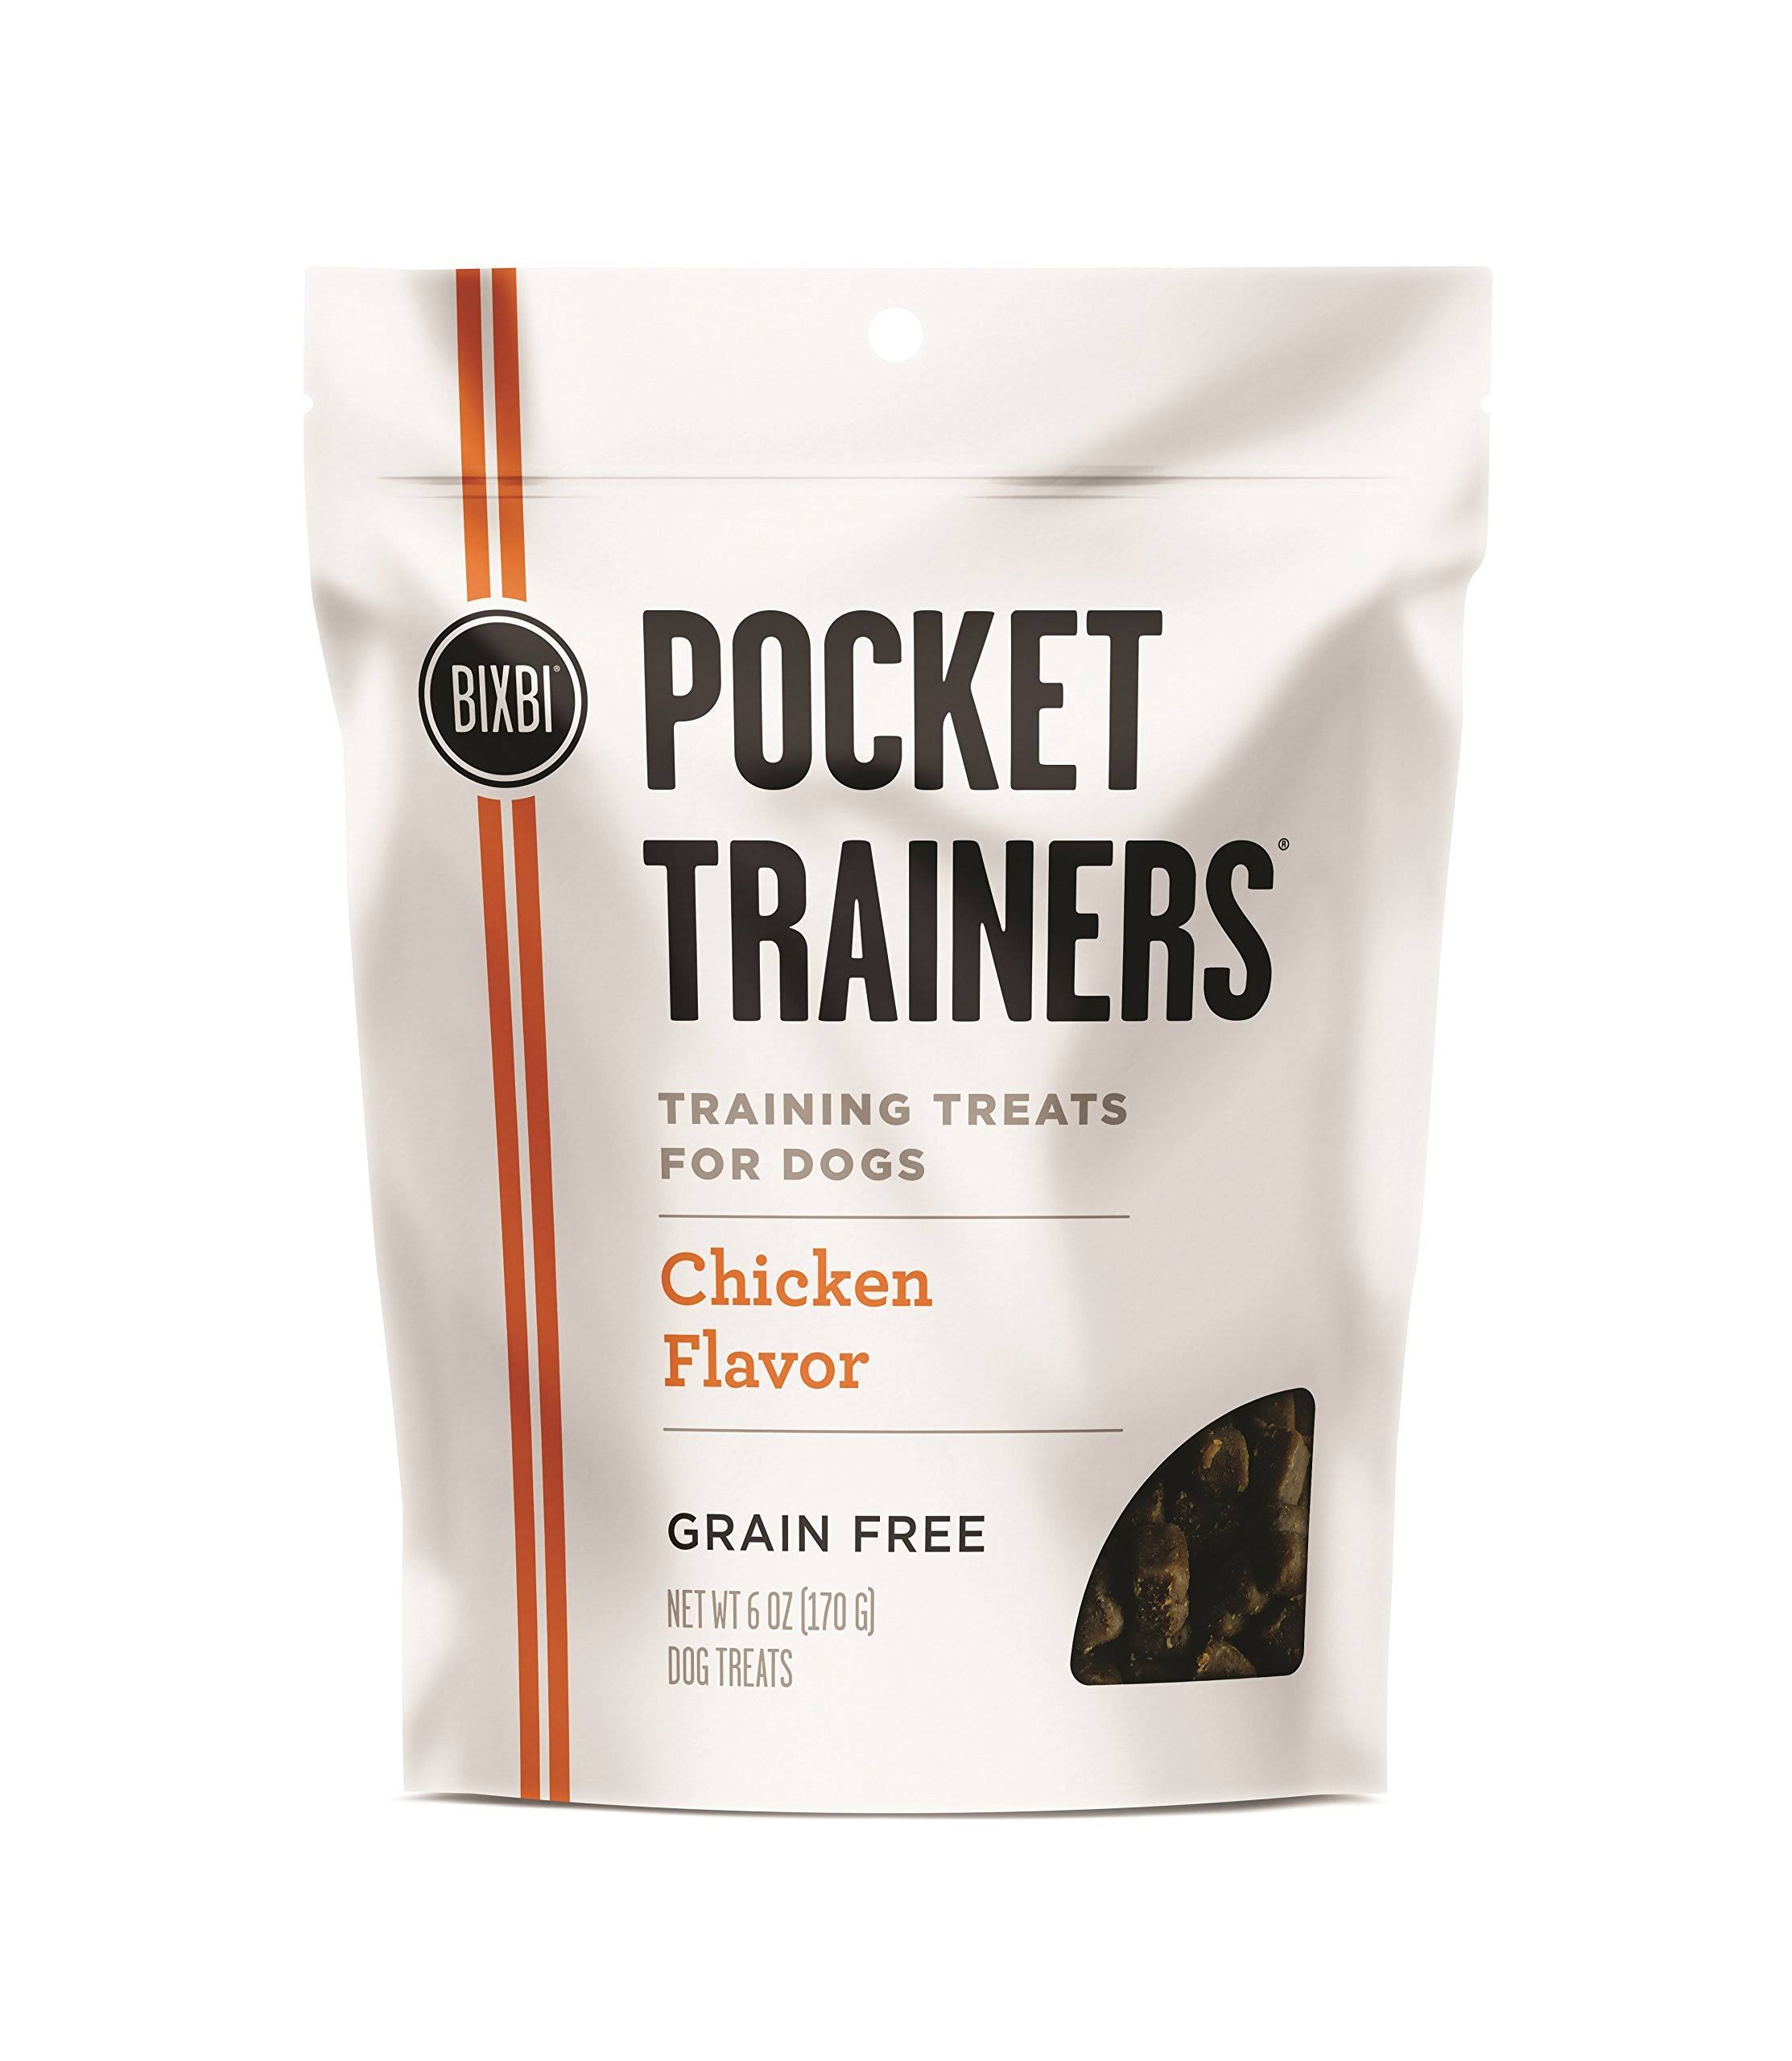 BIXBI Pocket Trainers, Chicken - Small Training Treats for Dogs - Low Calorie and Grain Free Dog Treats, Flavorful Pocket Size Healthy and All